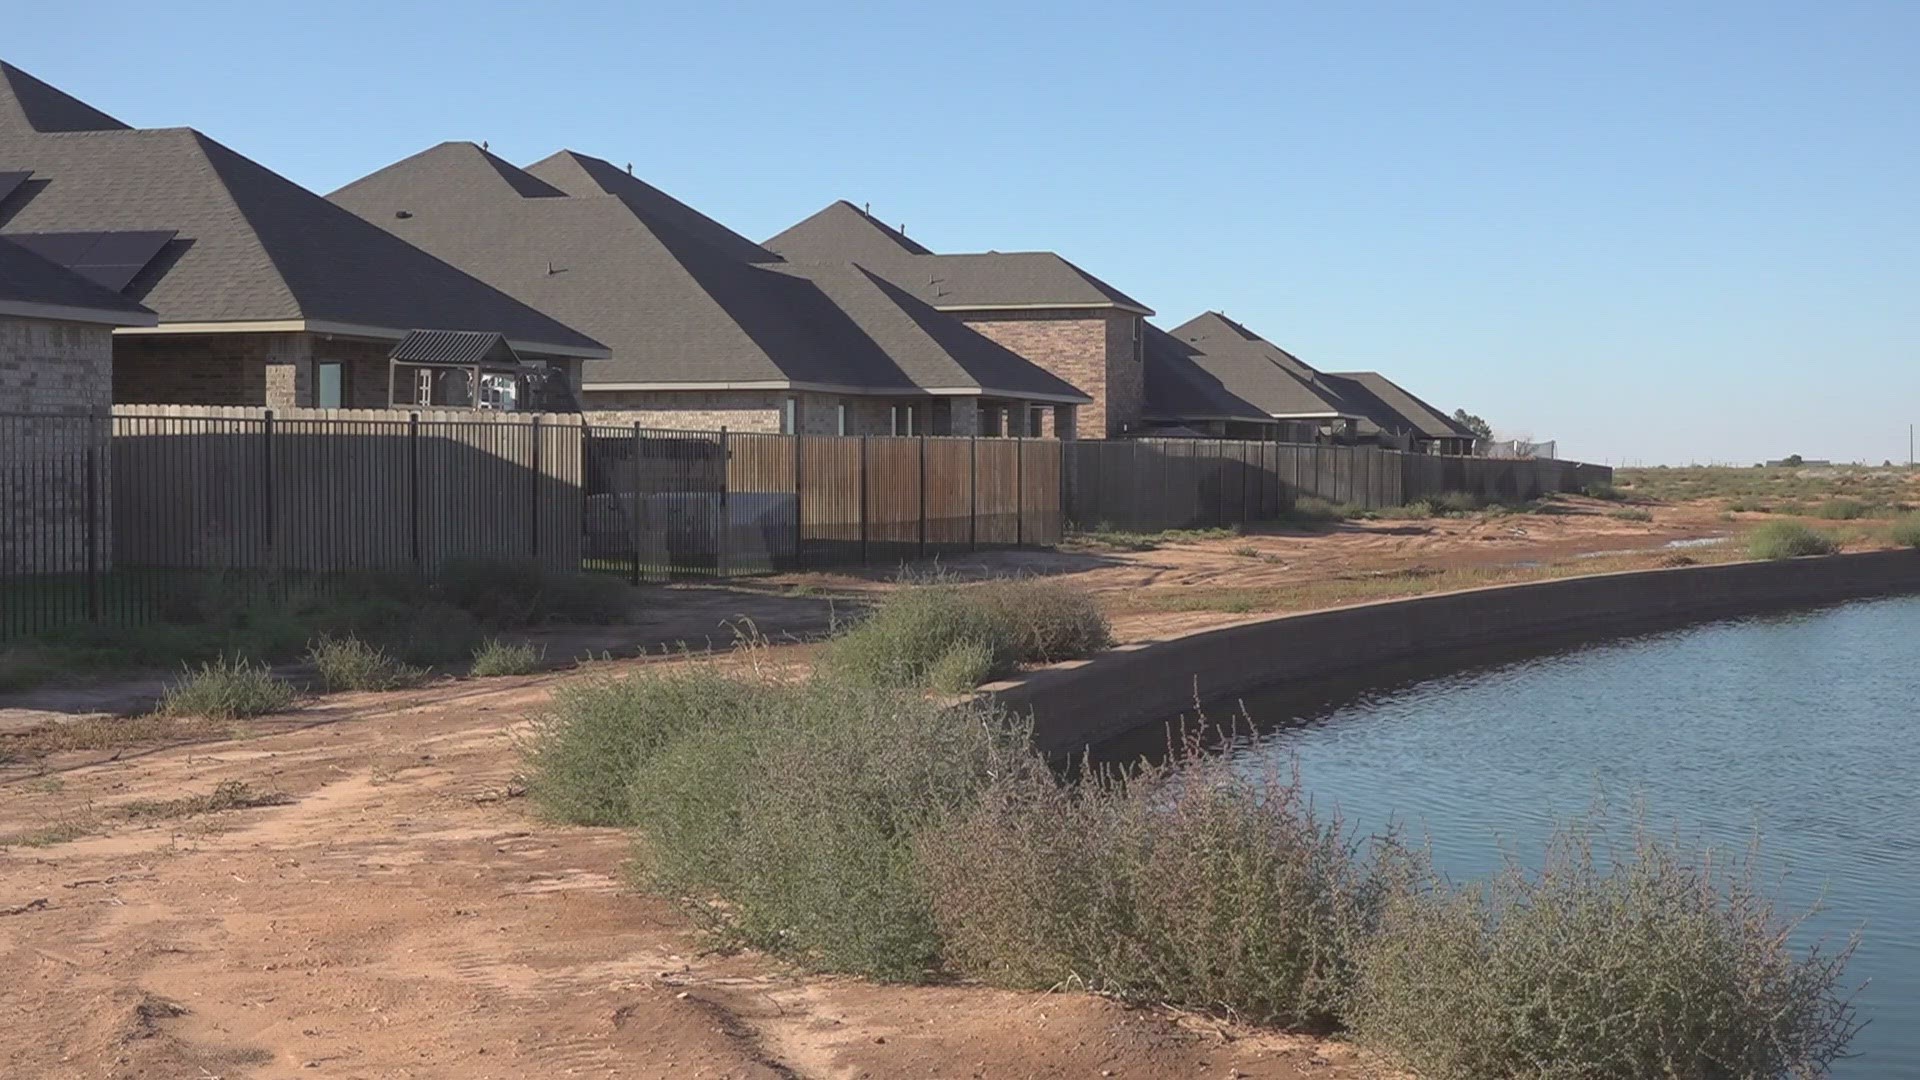 According to homeowners, Park Water Company is attempting to raise the water and sewer rate in Vander Ranch. Residents there are protesting the potential increase.